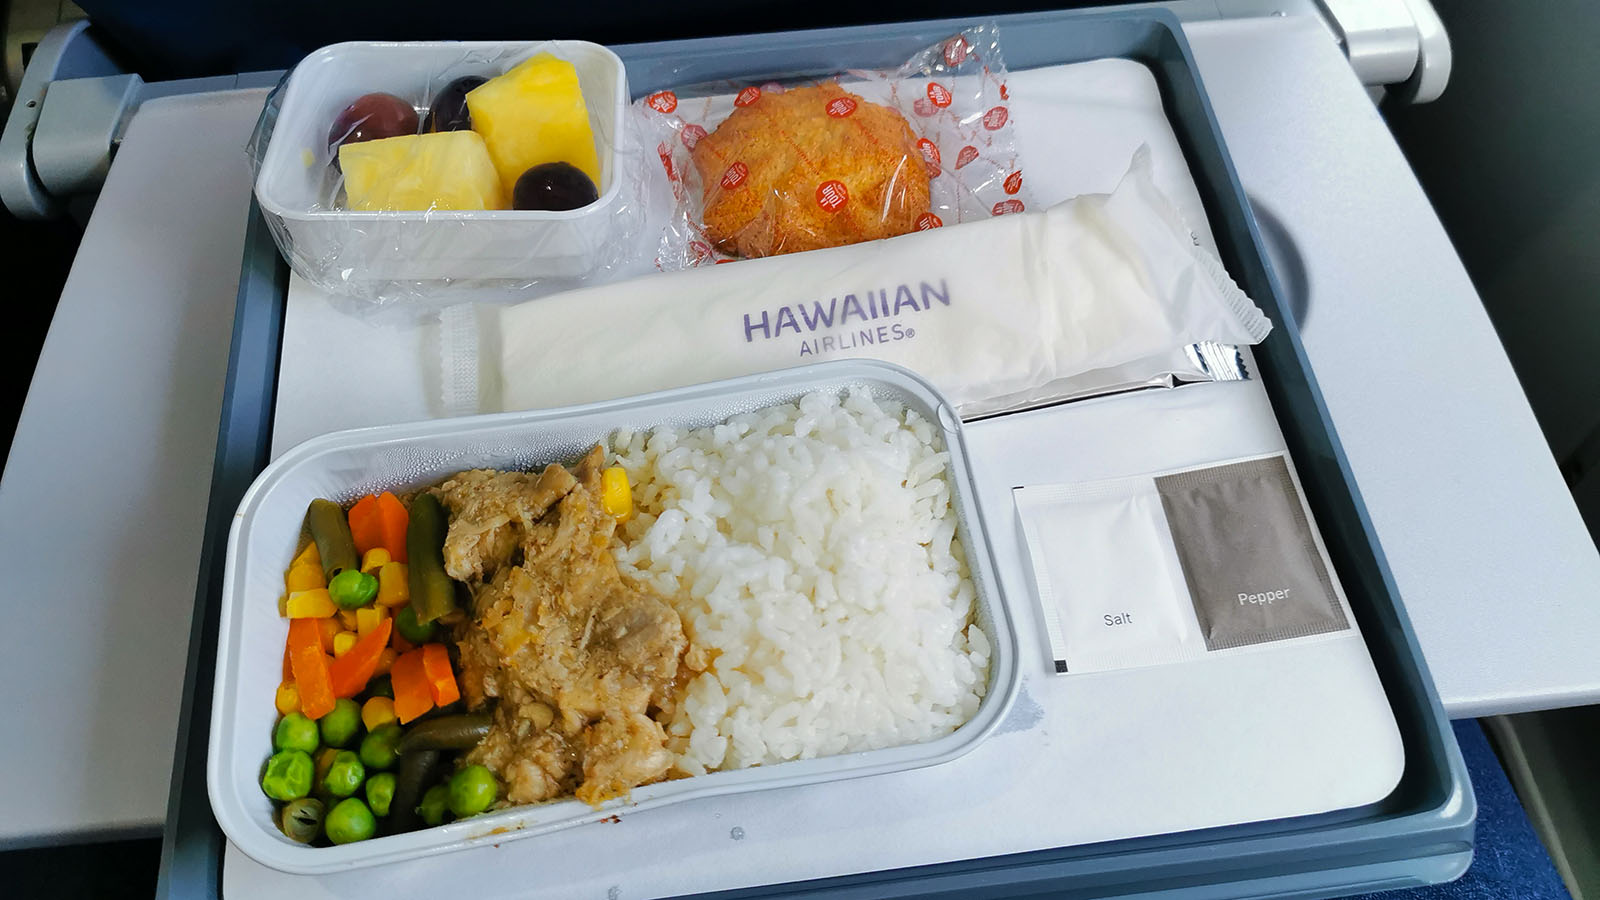 Chicken meal on Hawaiian Airlines